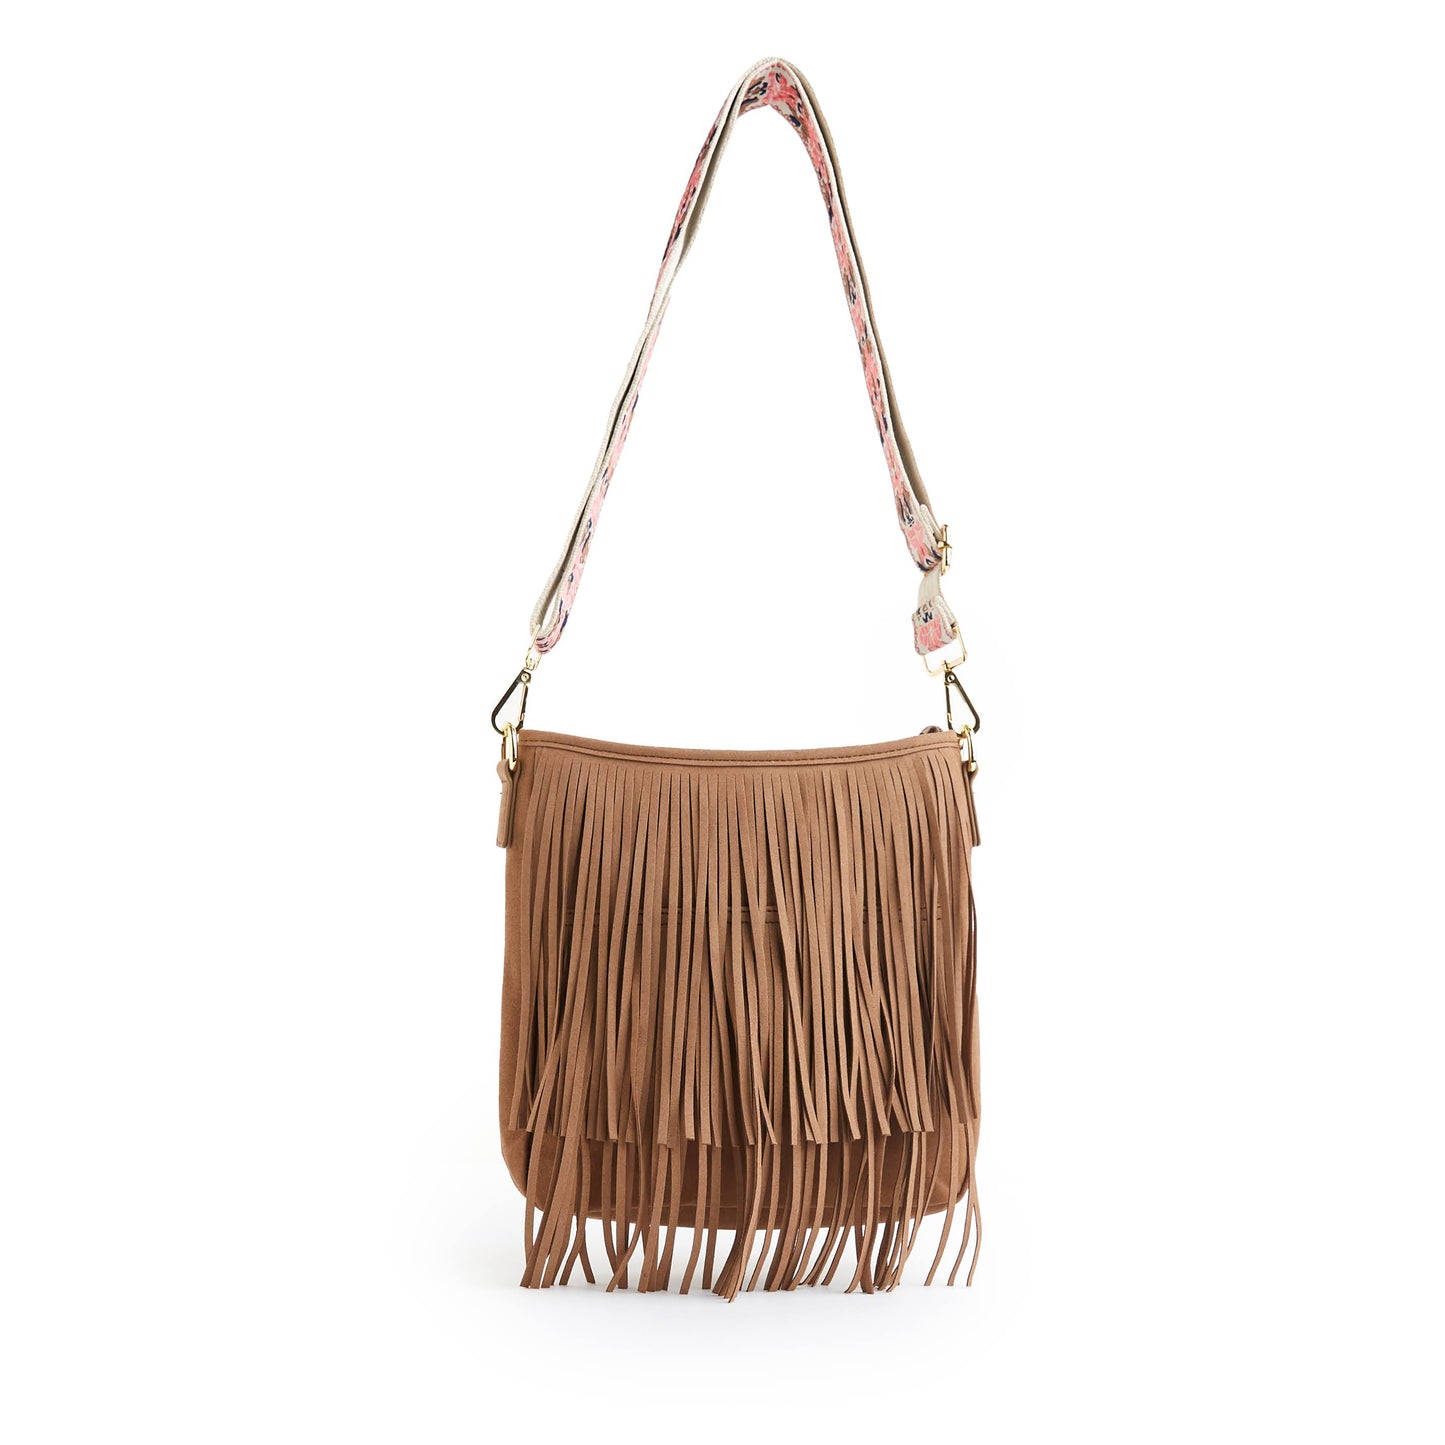 Western Style Fringe Bucket bag - Strap not included